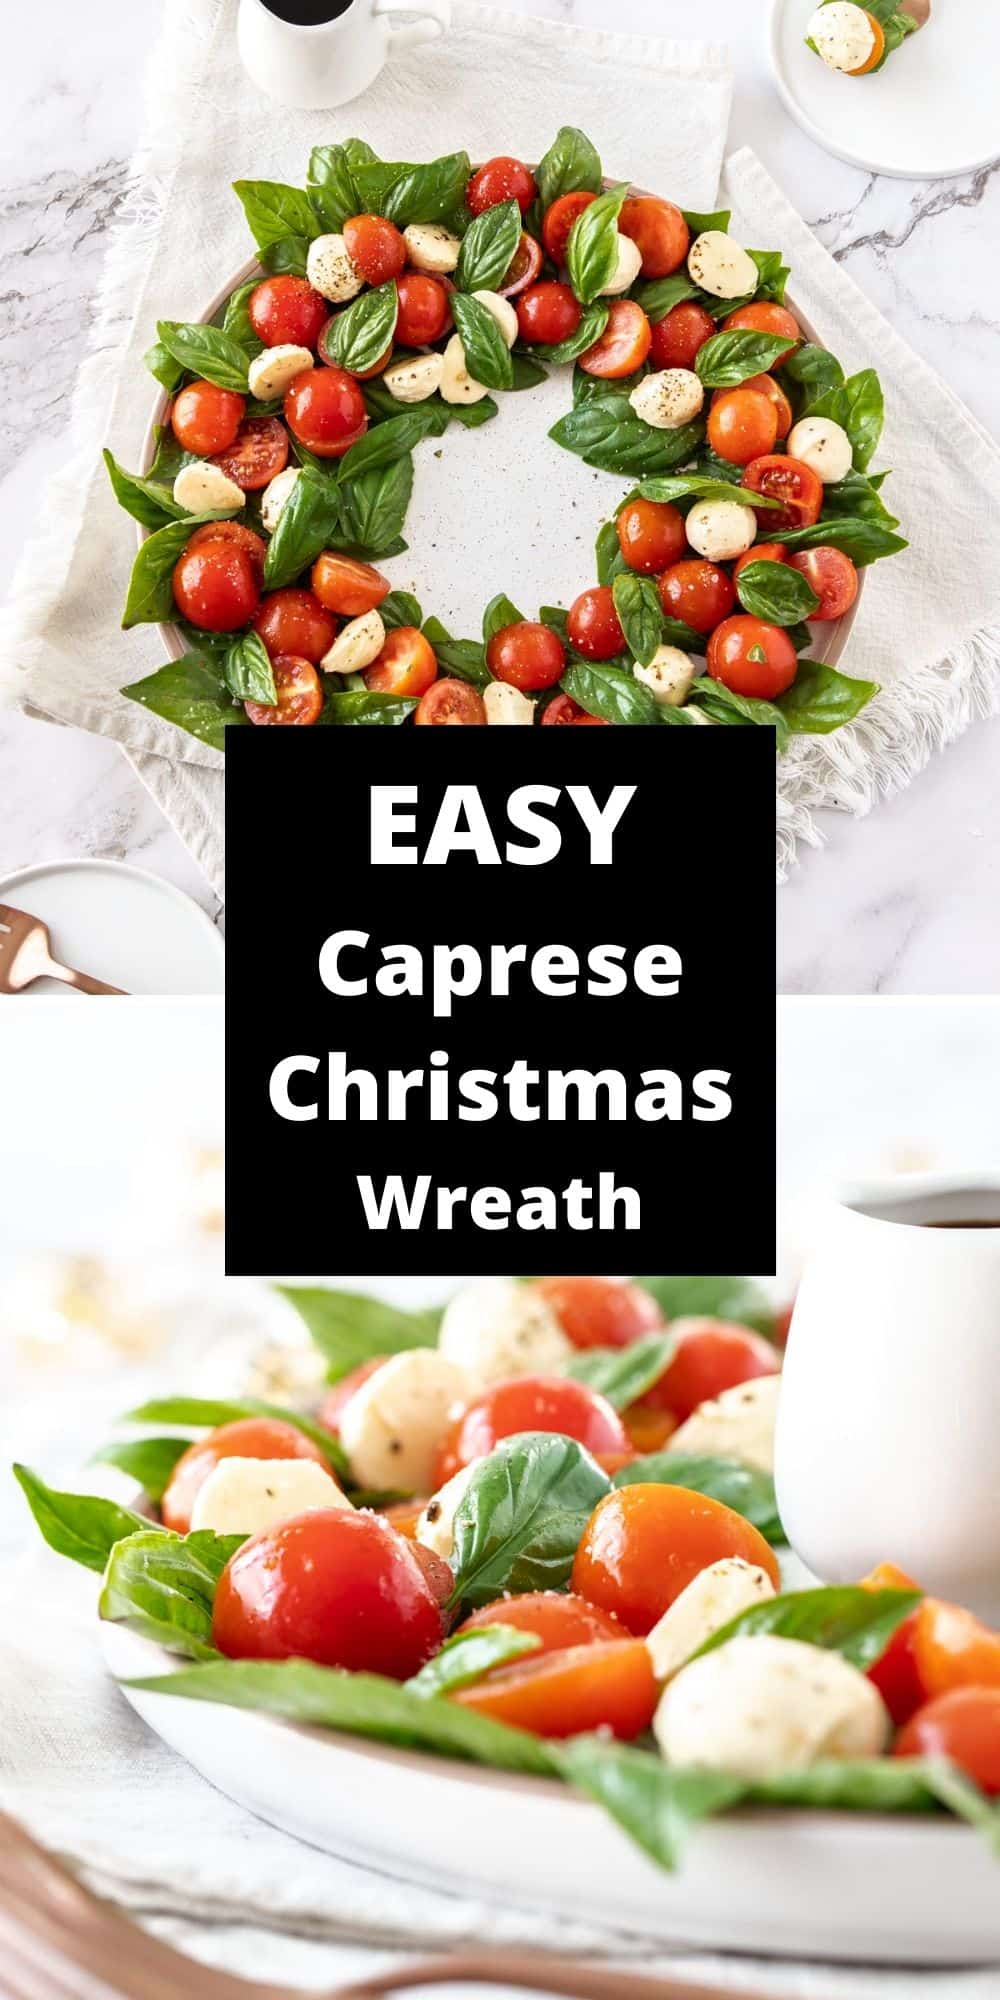 Caprese Christmas Wreath - It's Not Complicated Recipes